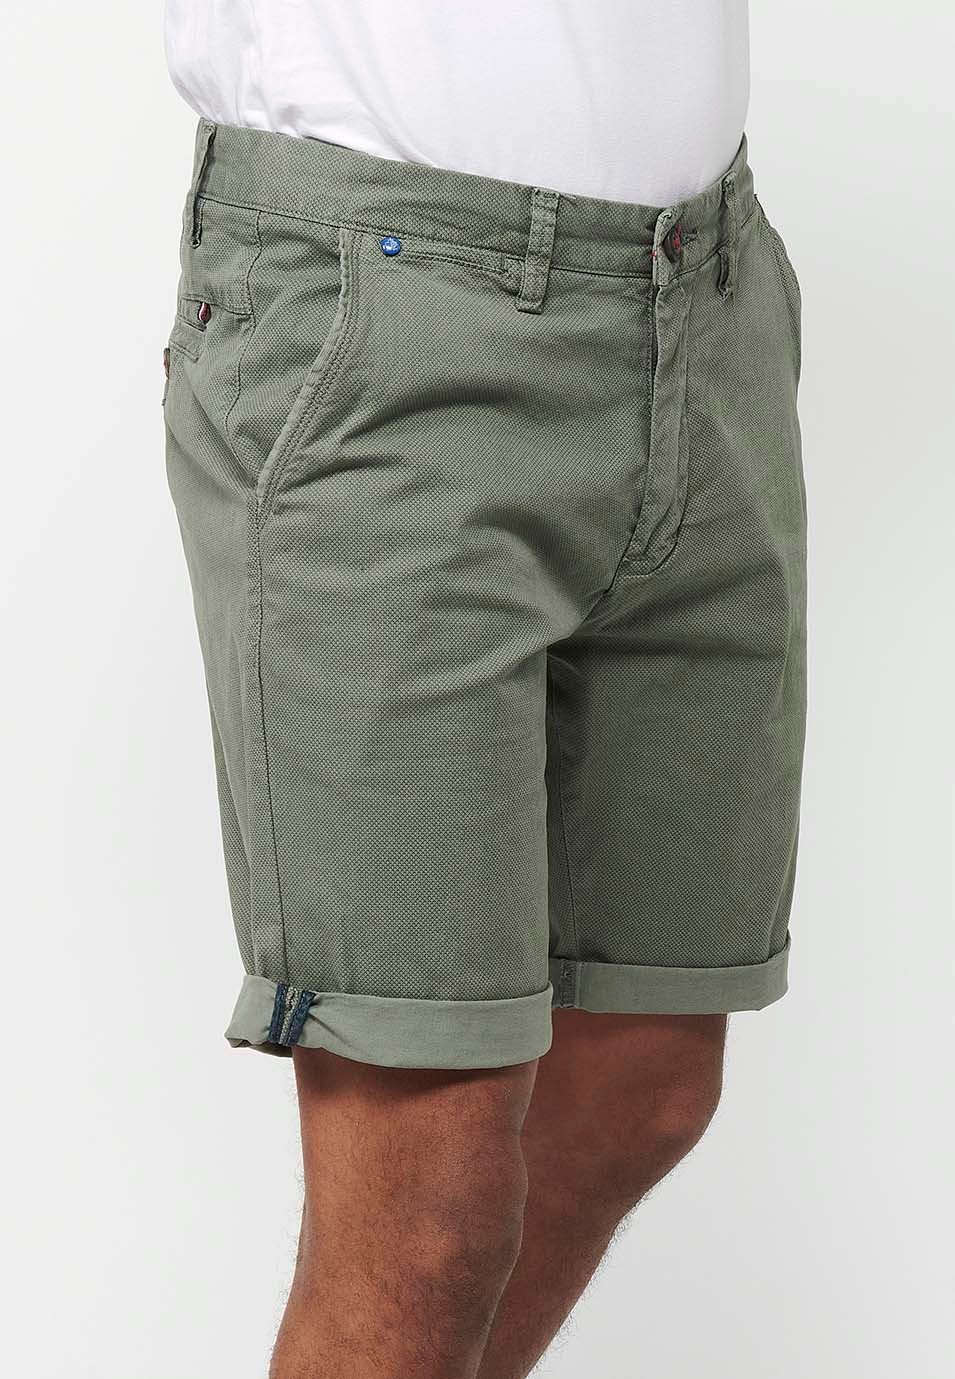 Bermuda Chino Shorts with Turn-Up Finish with Front Zipper and Button Closure with Four Pockets in Green Color for Men 3